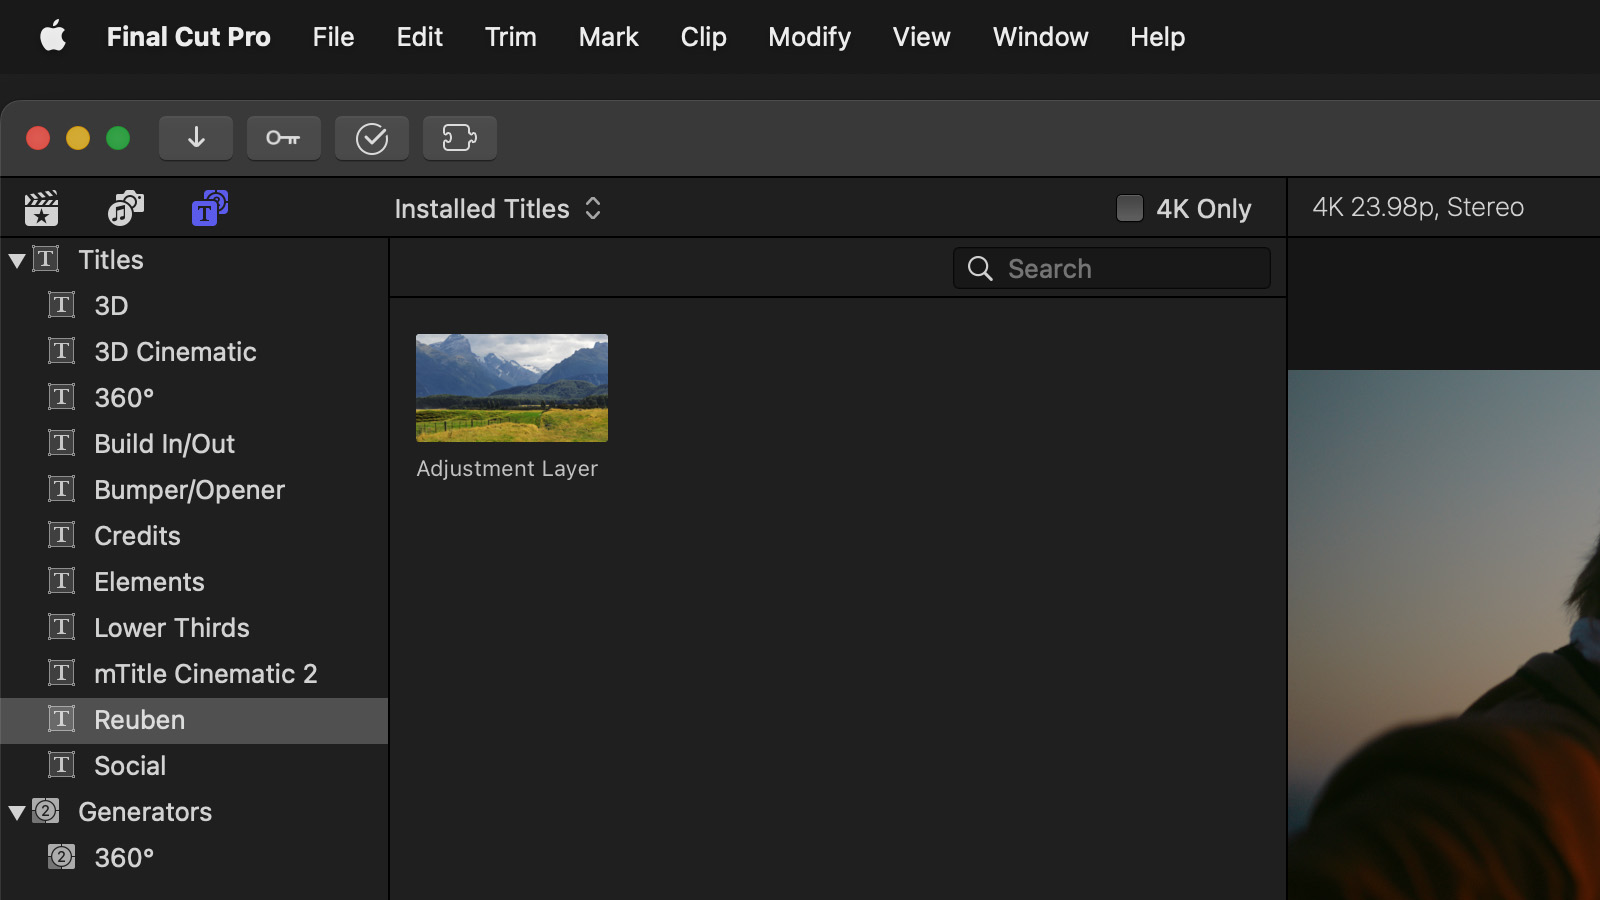 Save your title layer to a category in Motion and it will then be available in the Generators sidebar in Final Cut Pro.